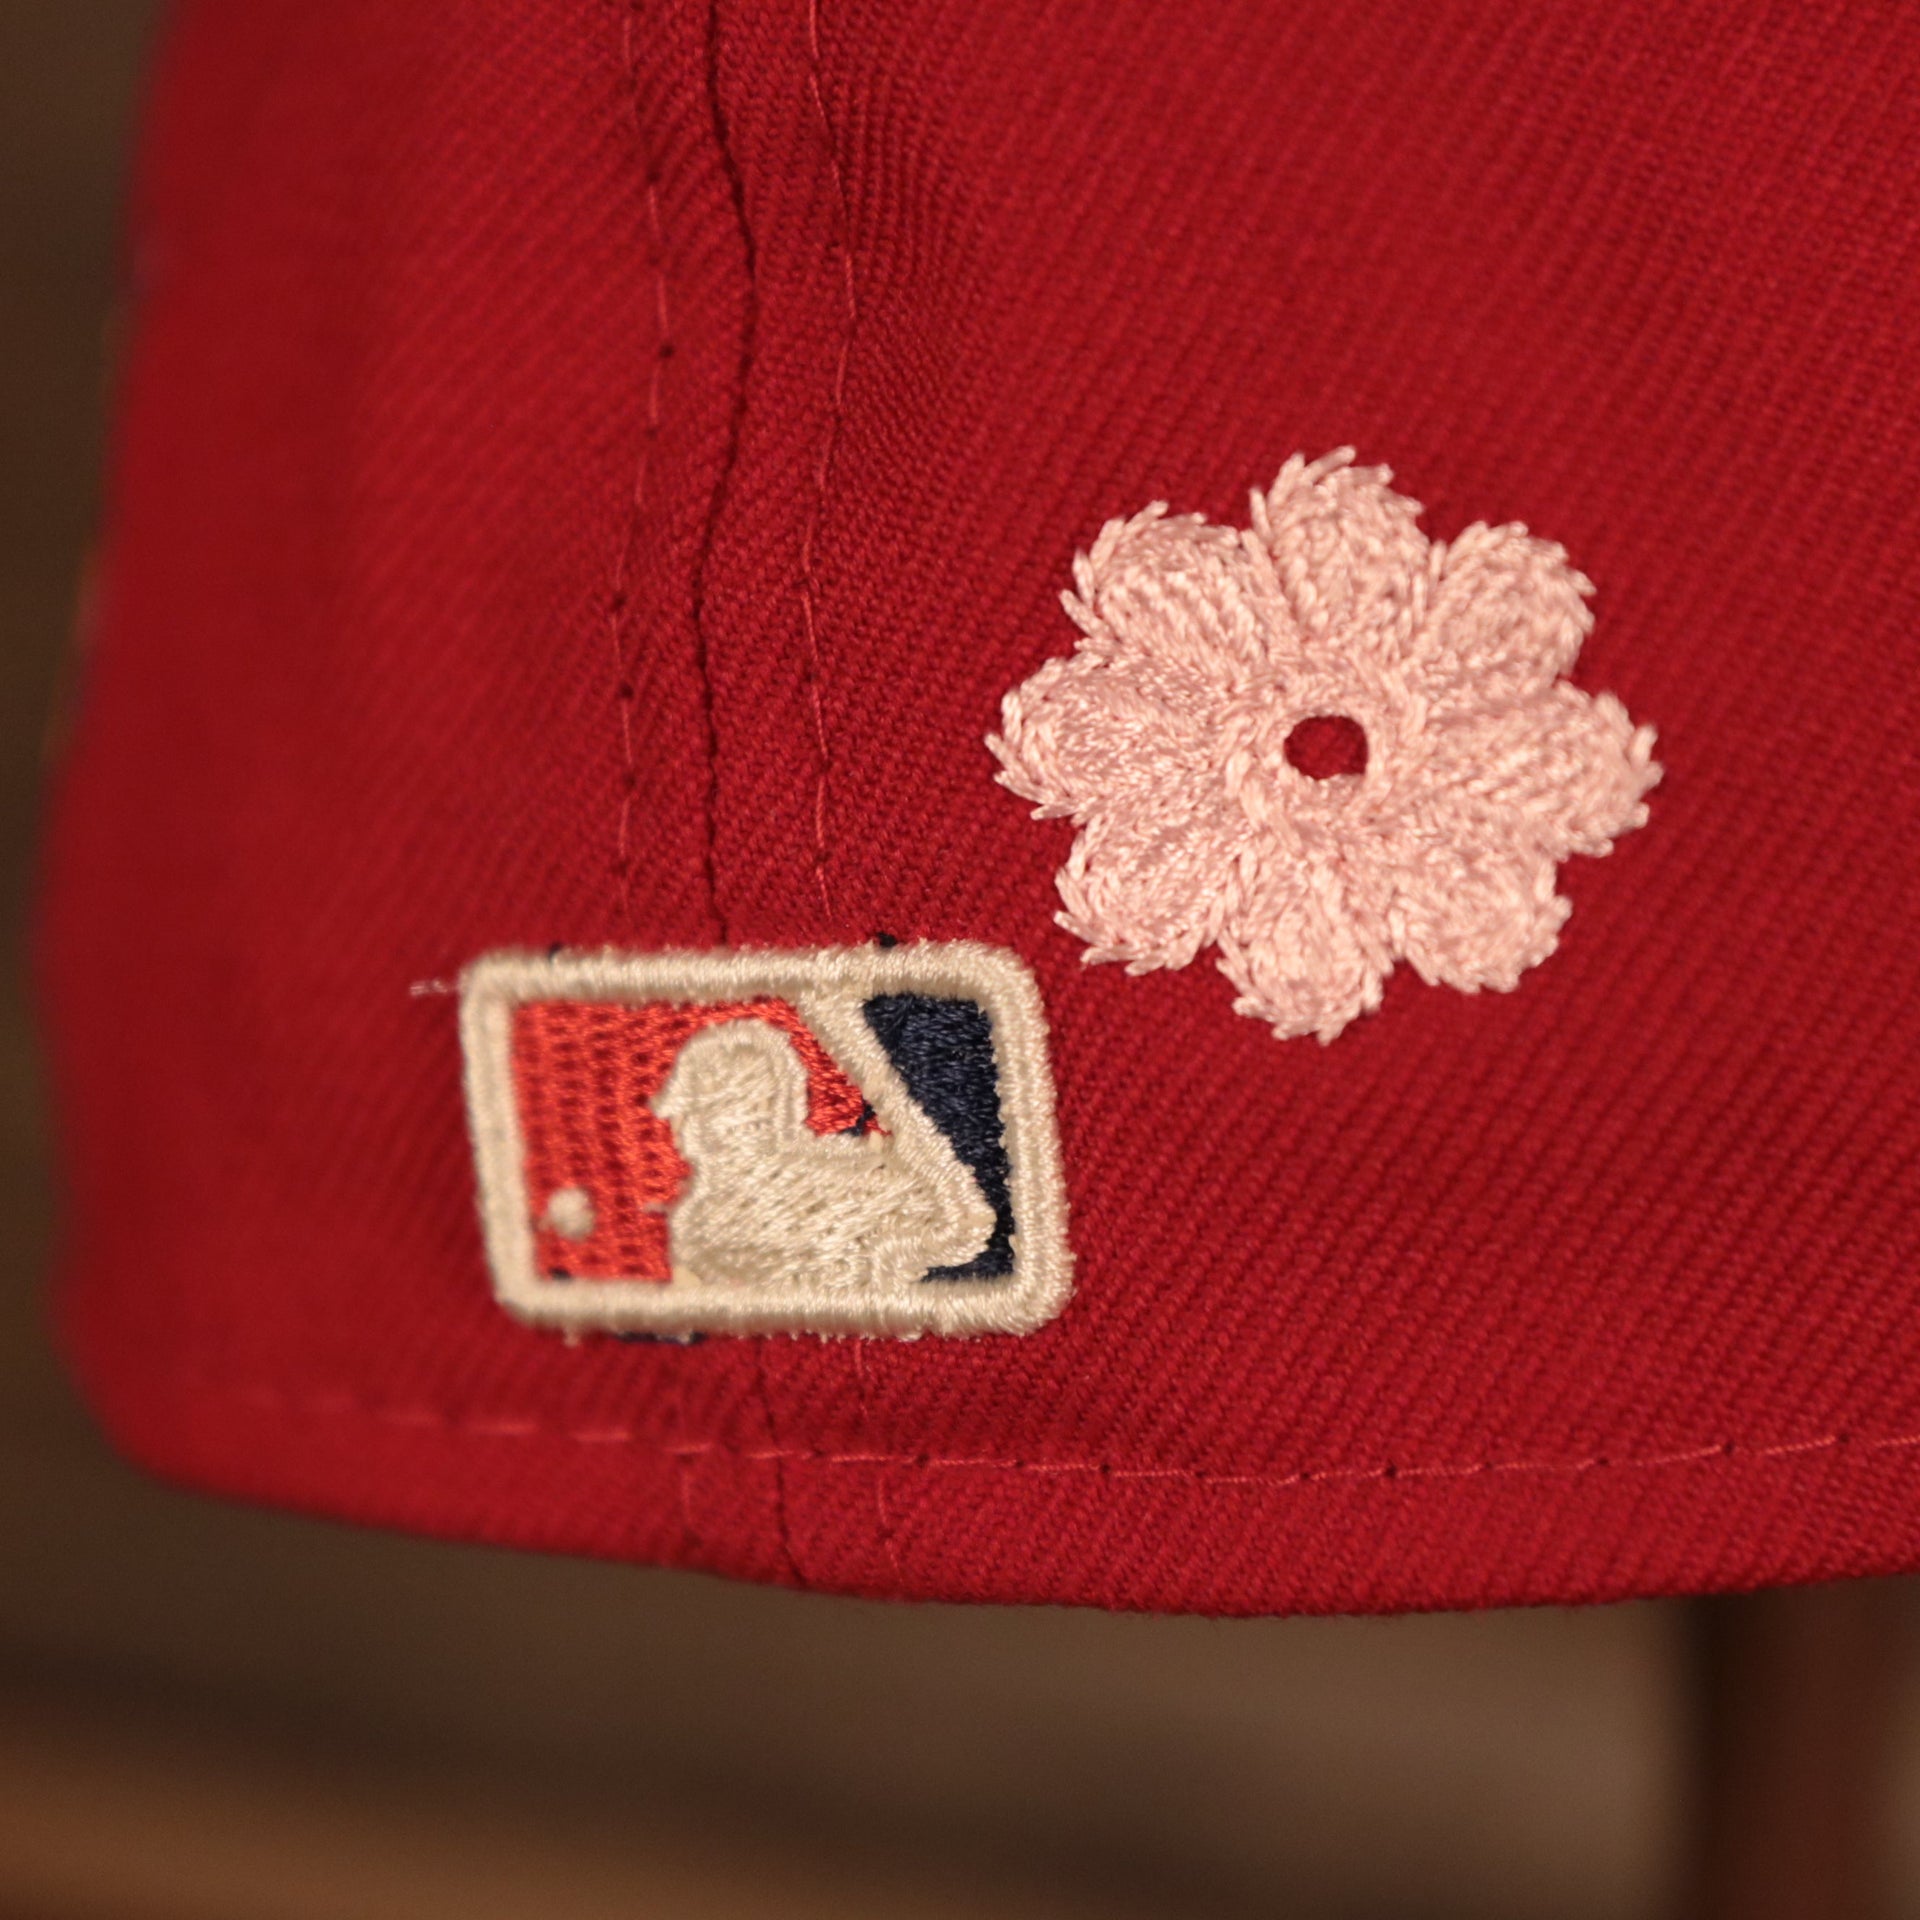 Close up of the MLB batterman logo and a crotchet flower patch on the Philadelphia Phillies All Over Floral Pattern Flower Crotchet Side Patch Pink Bottom 59Fifty Fitted Cap